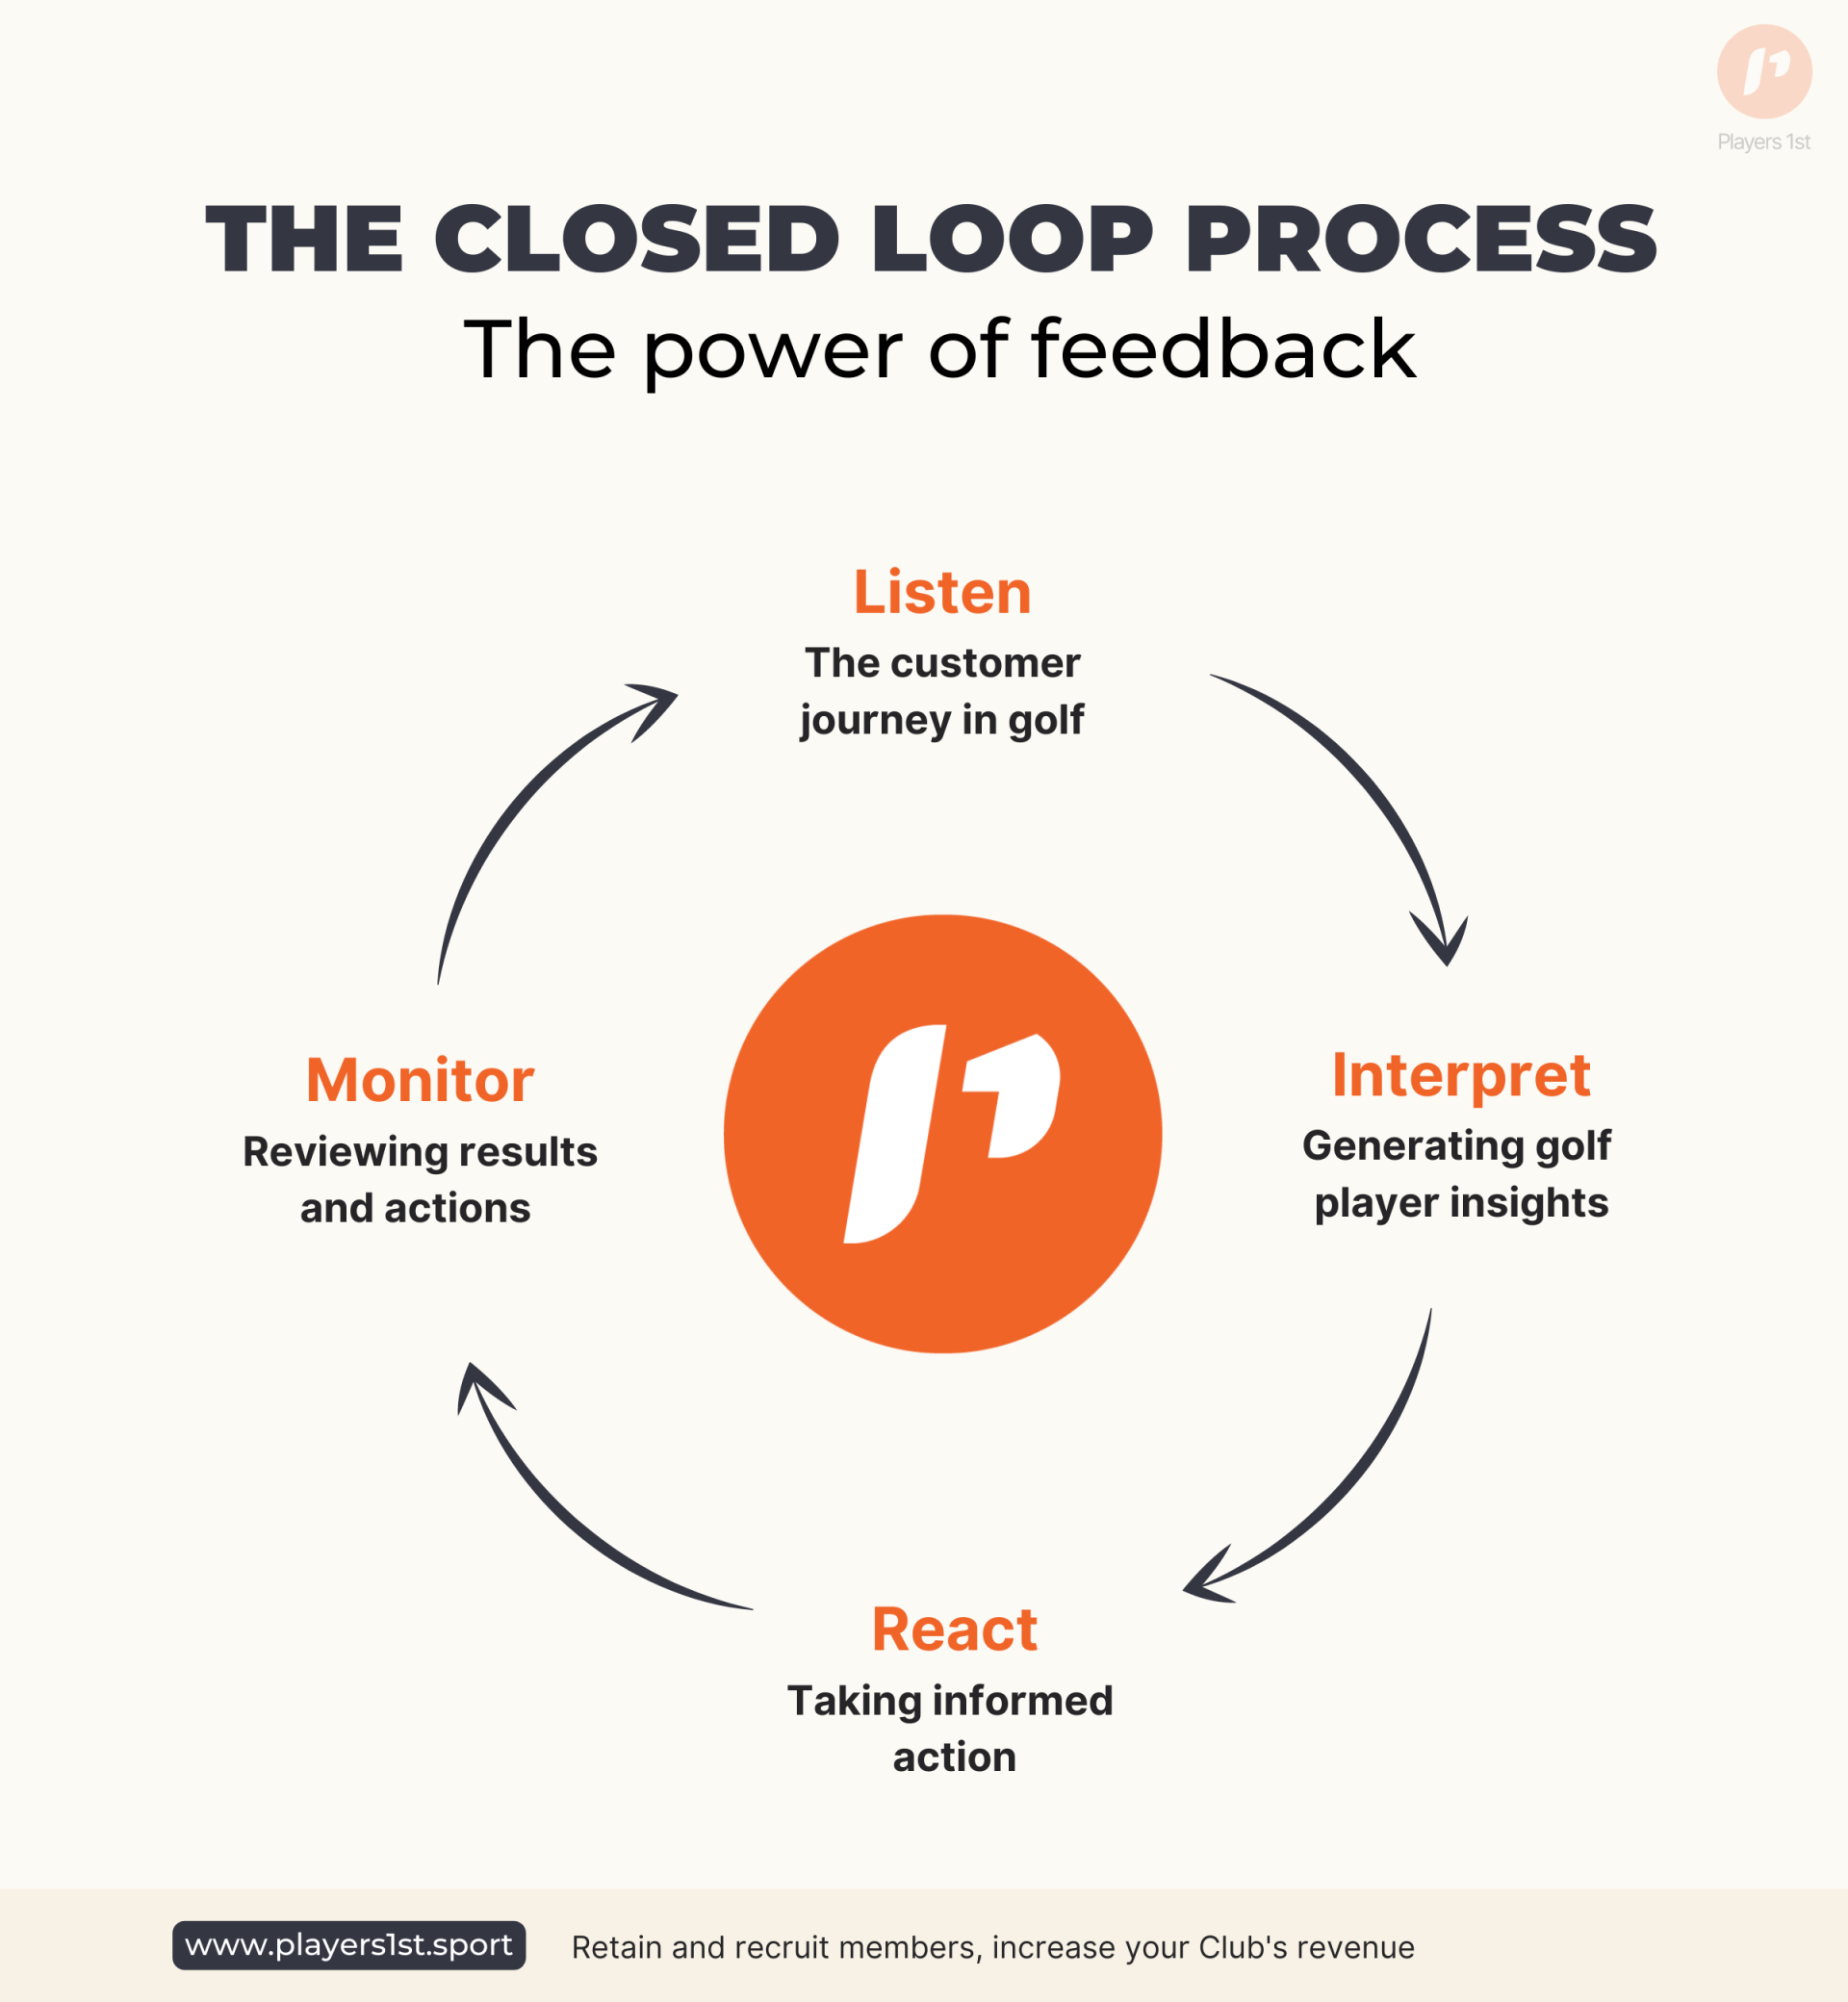 Image of the closed loop process - the power of feedback.